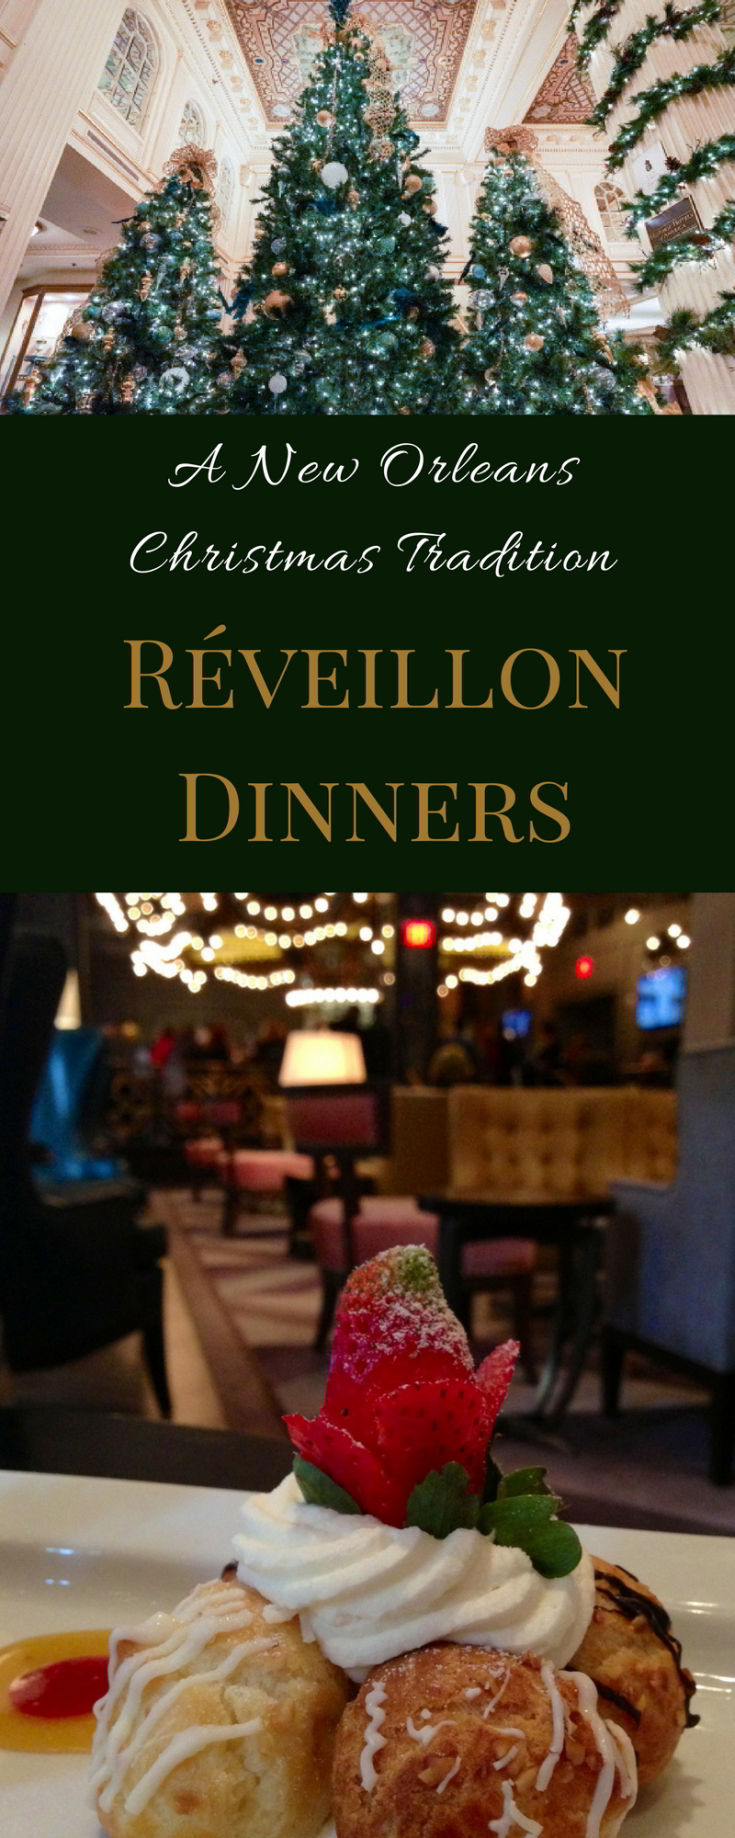 Réveillon Dinners in New Orleans are a historic holiday tradition, dating back to the 19th century. Enjoy this Christmas celebration at Criollo Restaurant!